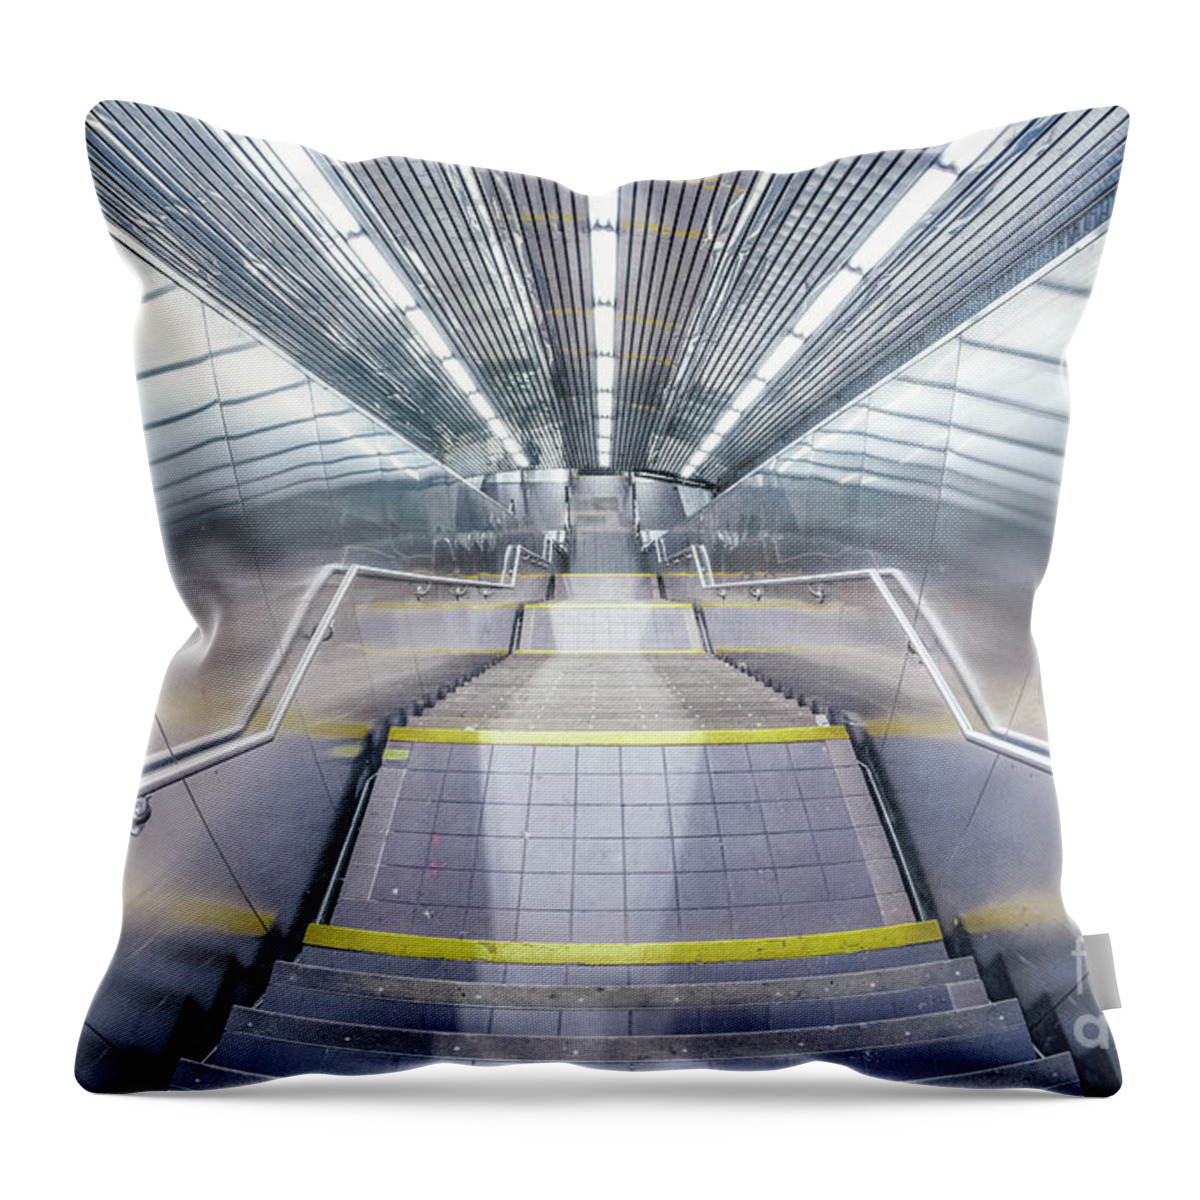 Kremsdorf Throw Pillow featuring the photograph Stepping Down To The Underground by Evelina Kremsdorf